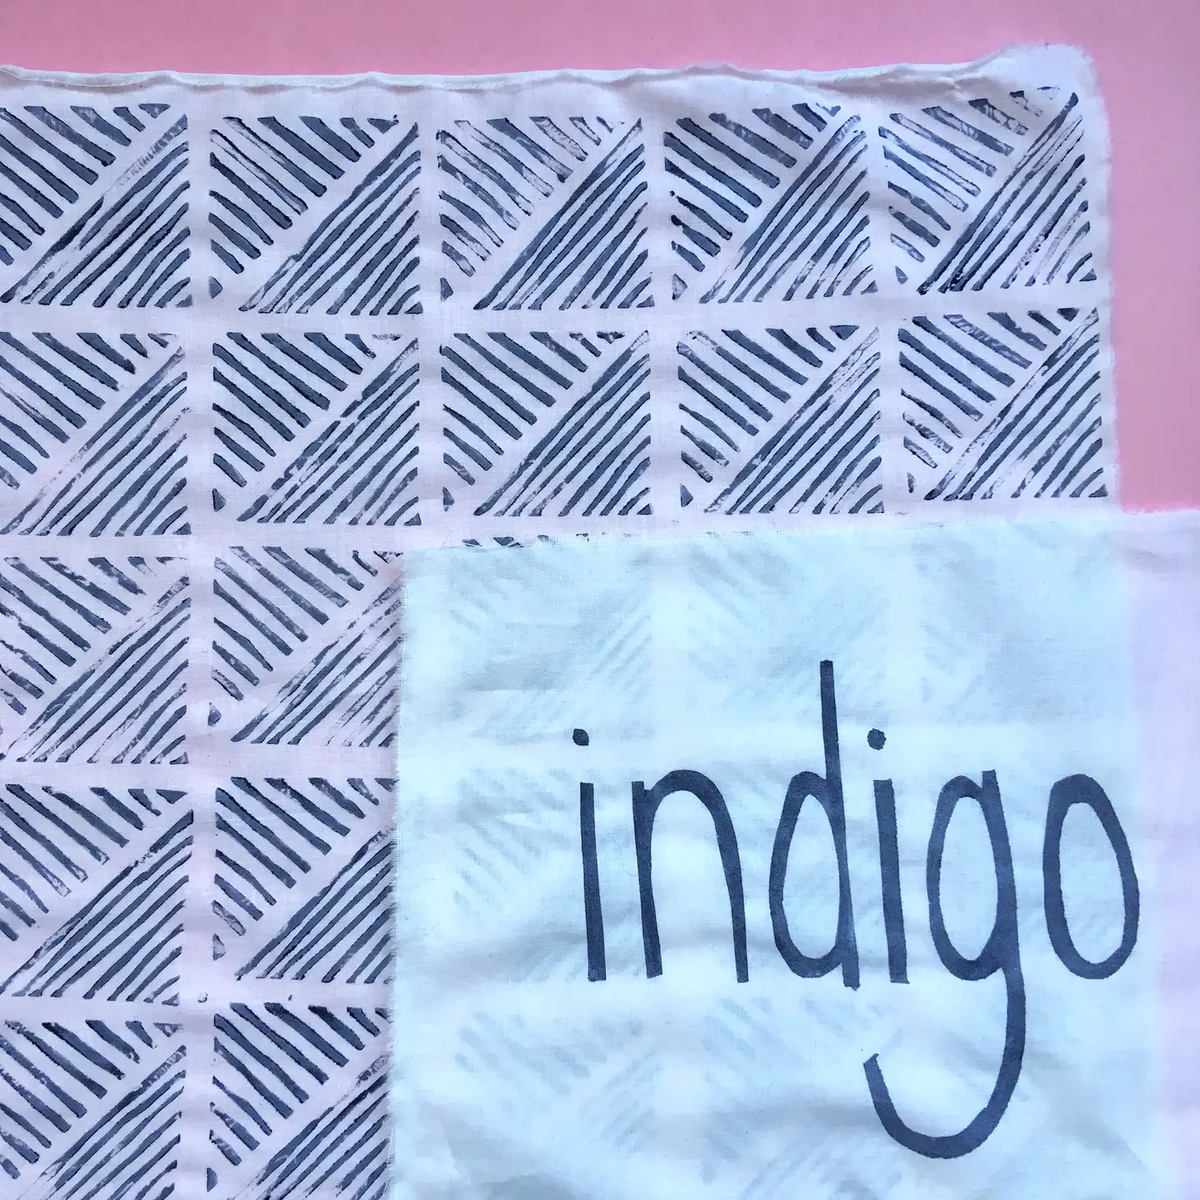 The Love of Colour - Indigo block printing kit for dyeing